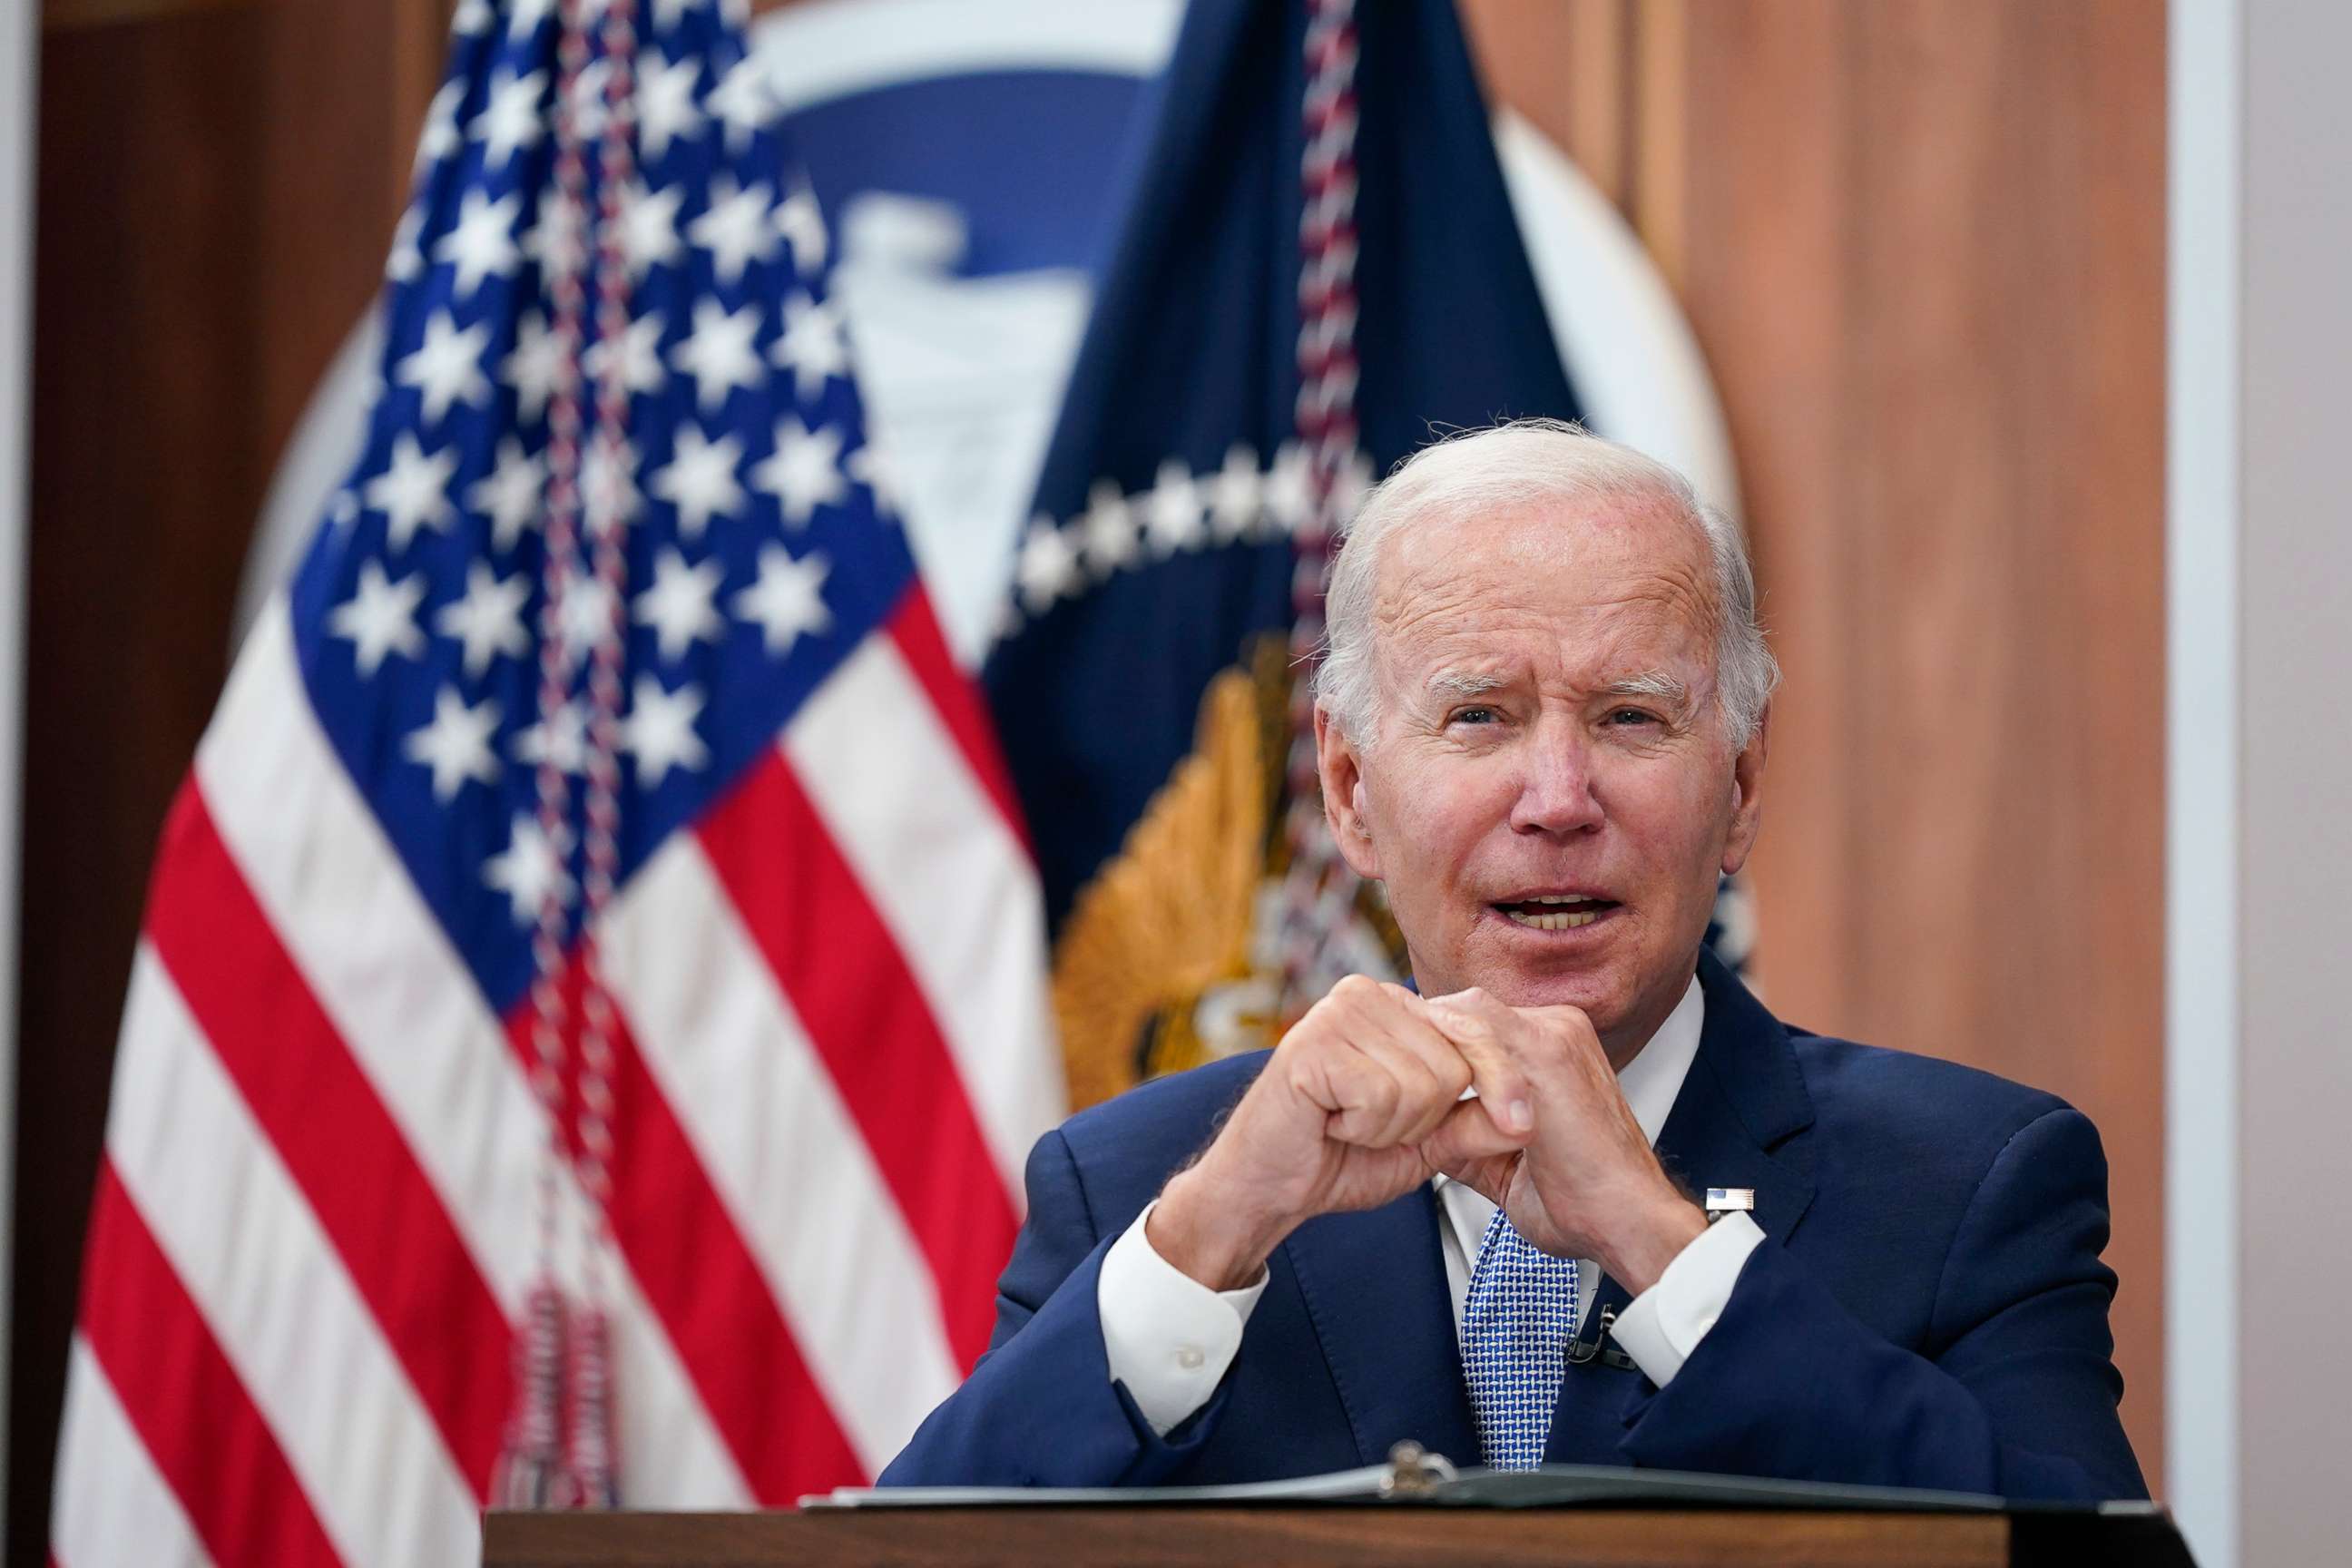 PHOTO: President Joe Biden speaks about the economy during a meeting with CEOs in the South Court Auditorium on the White House complex in Washington, D.C., on July 28, 2022.